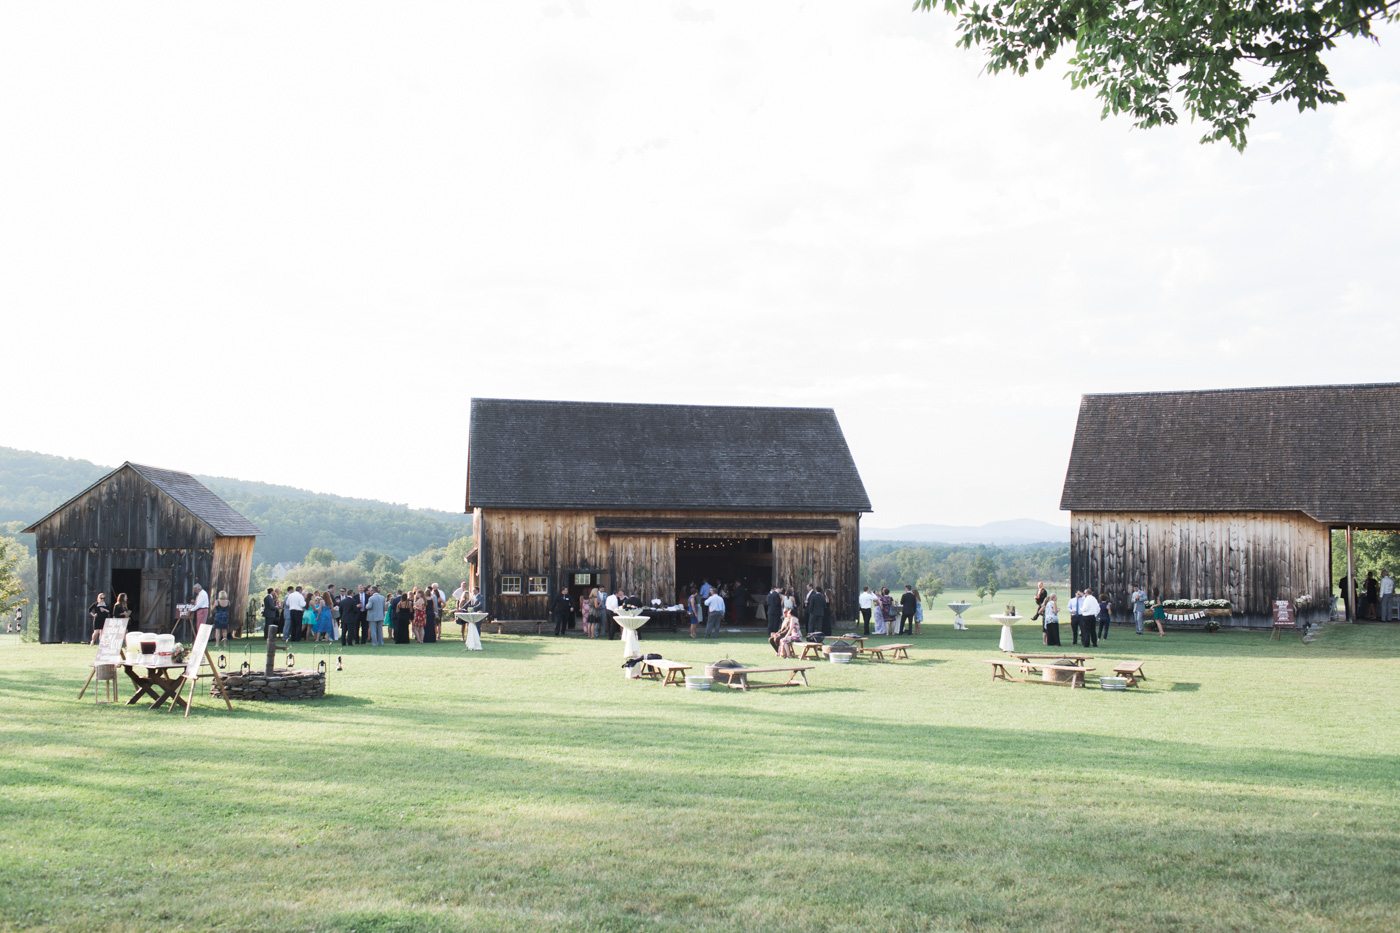 Outdoor wedding reception at historic barn setting in upstate New York